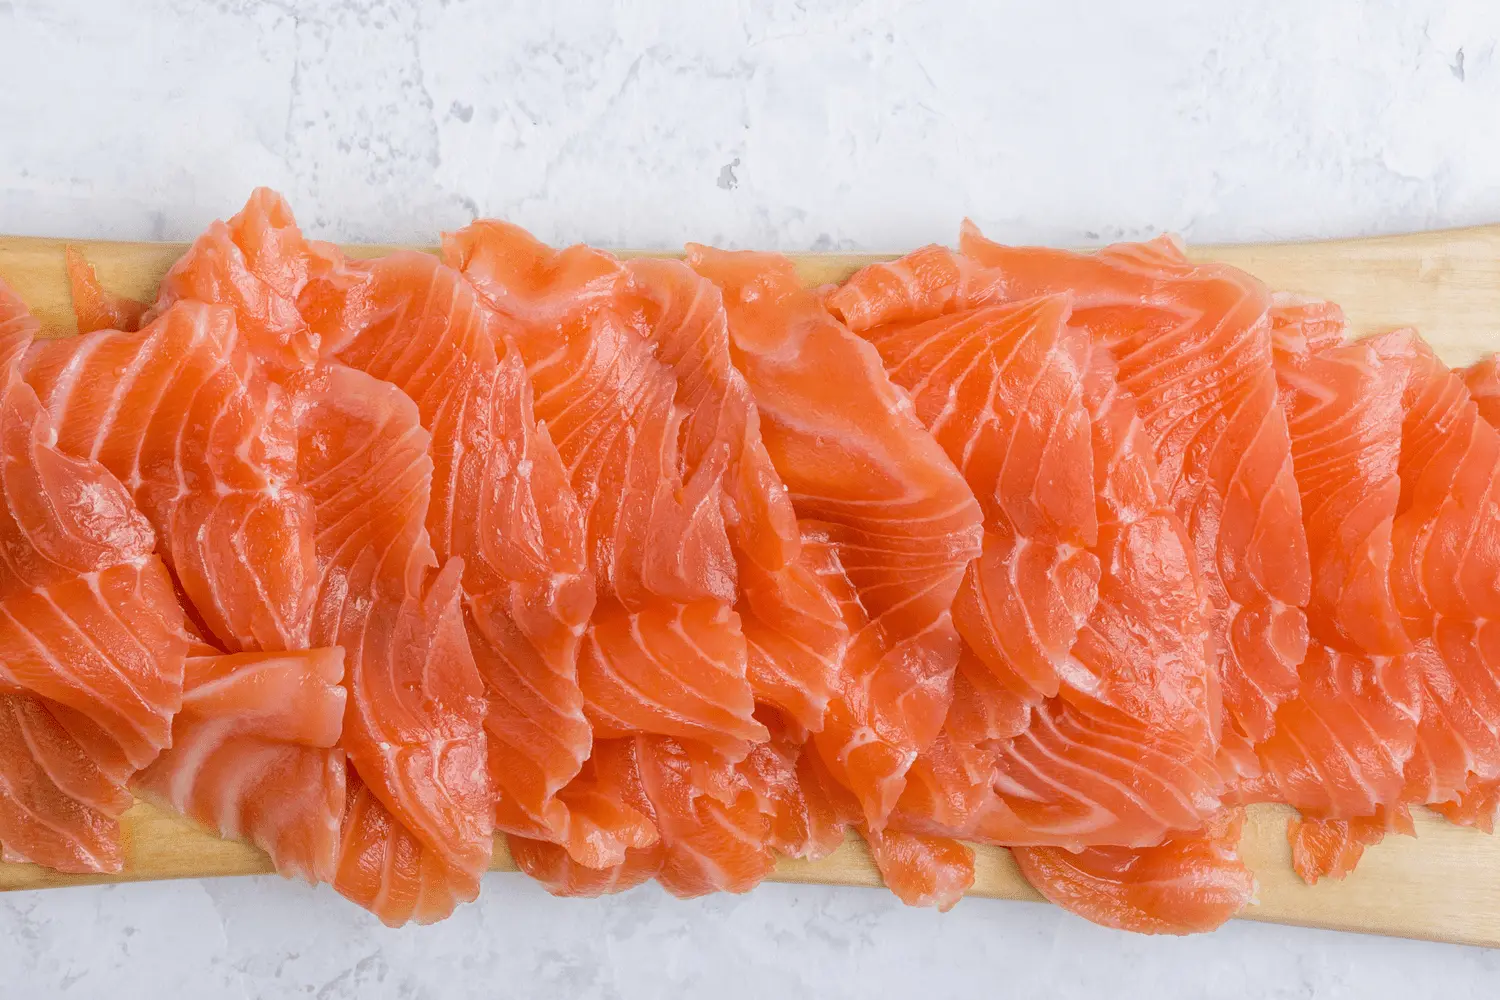 smoked salmon cuts - What are the different cuts of salmon